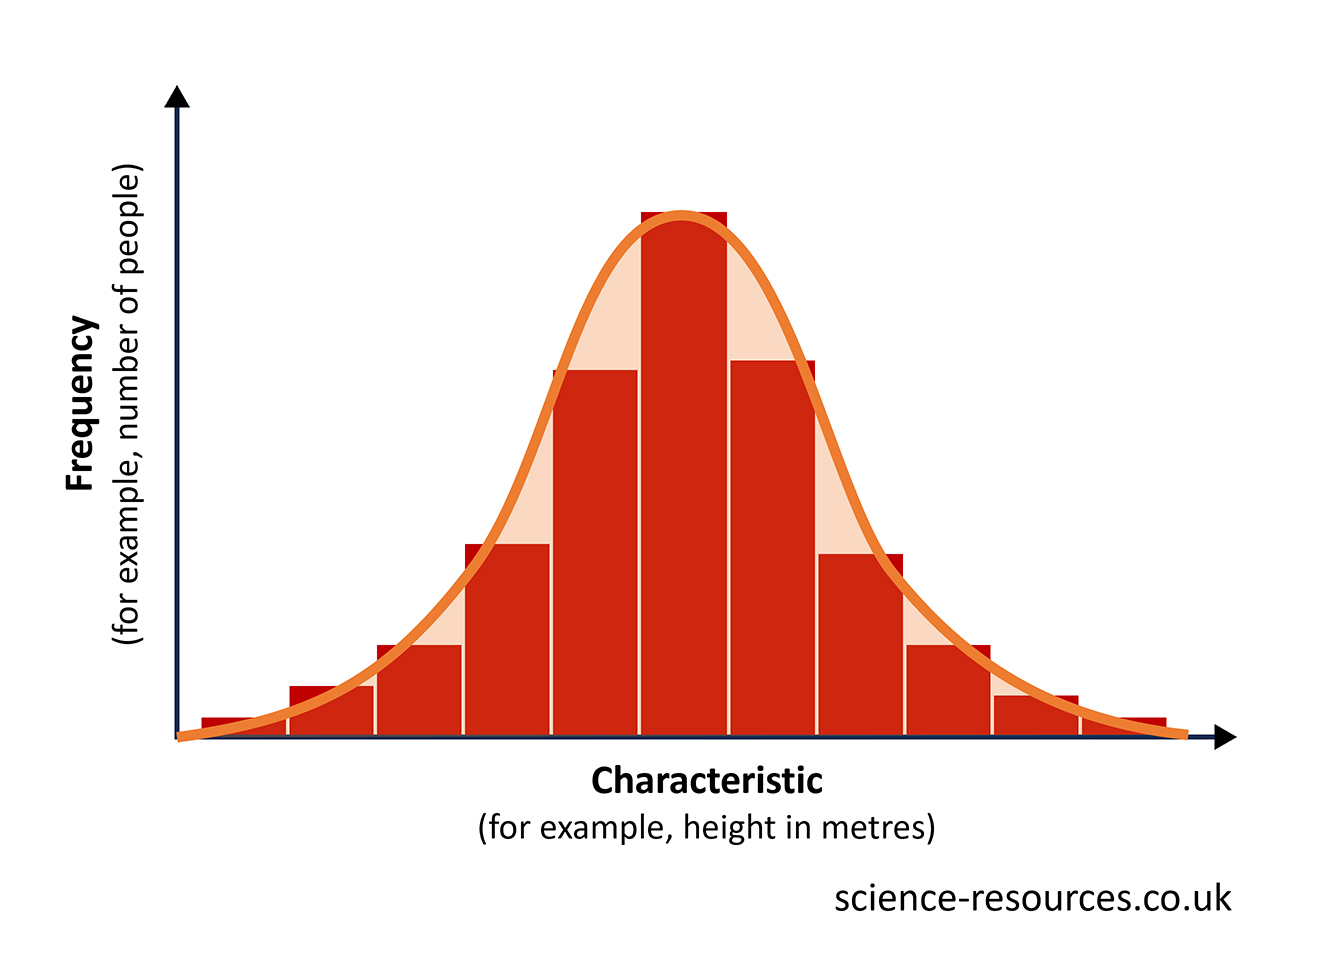 This graph shows a smooth bell-shaped curve of normal distribution.